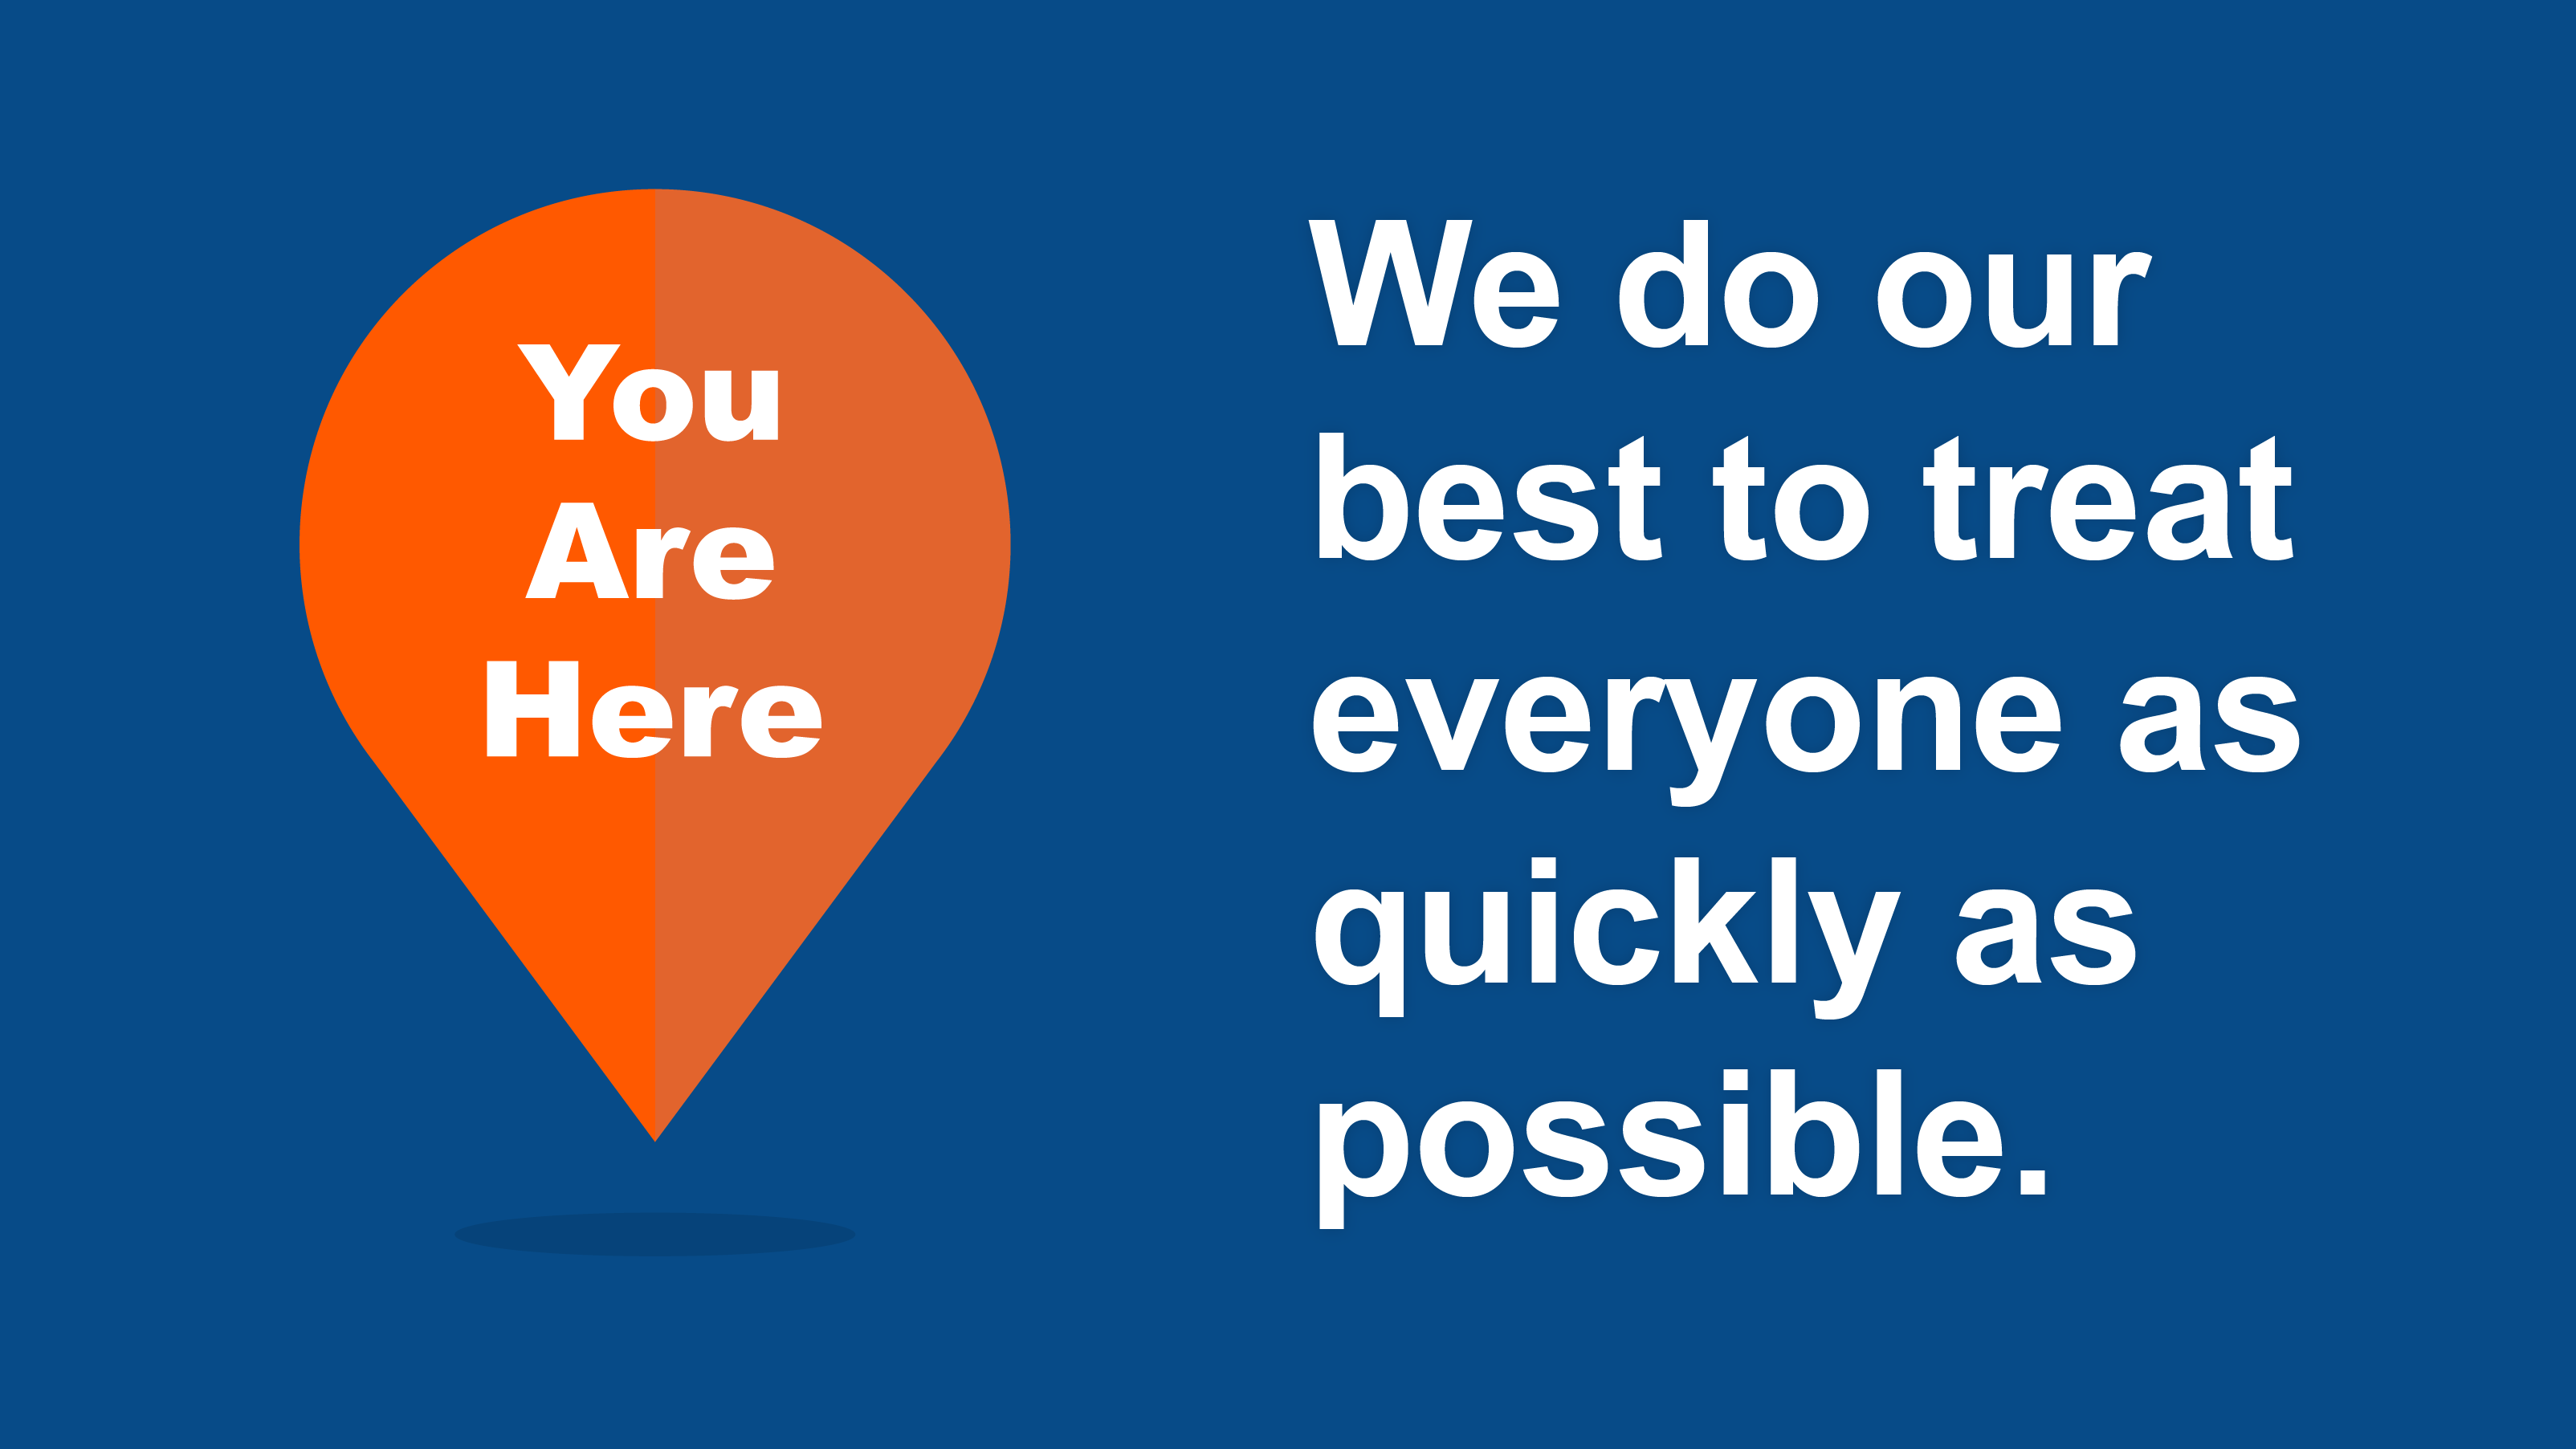 You are here. We do our best to treat everyone as quickly as possible.